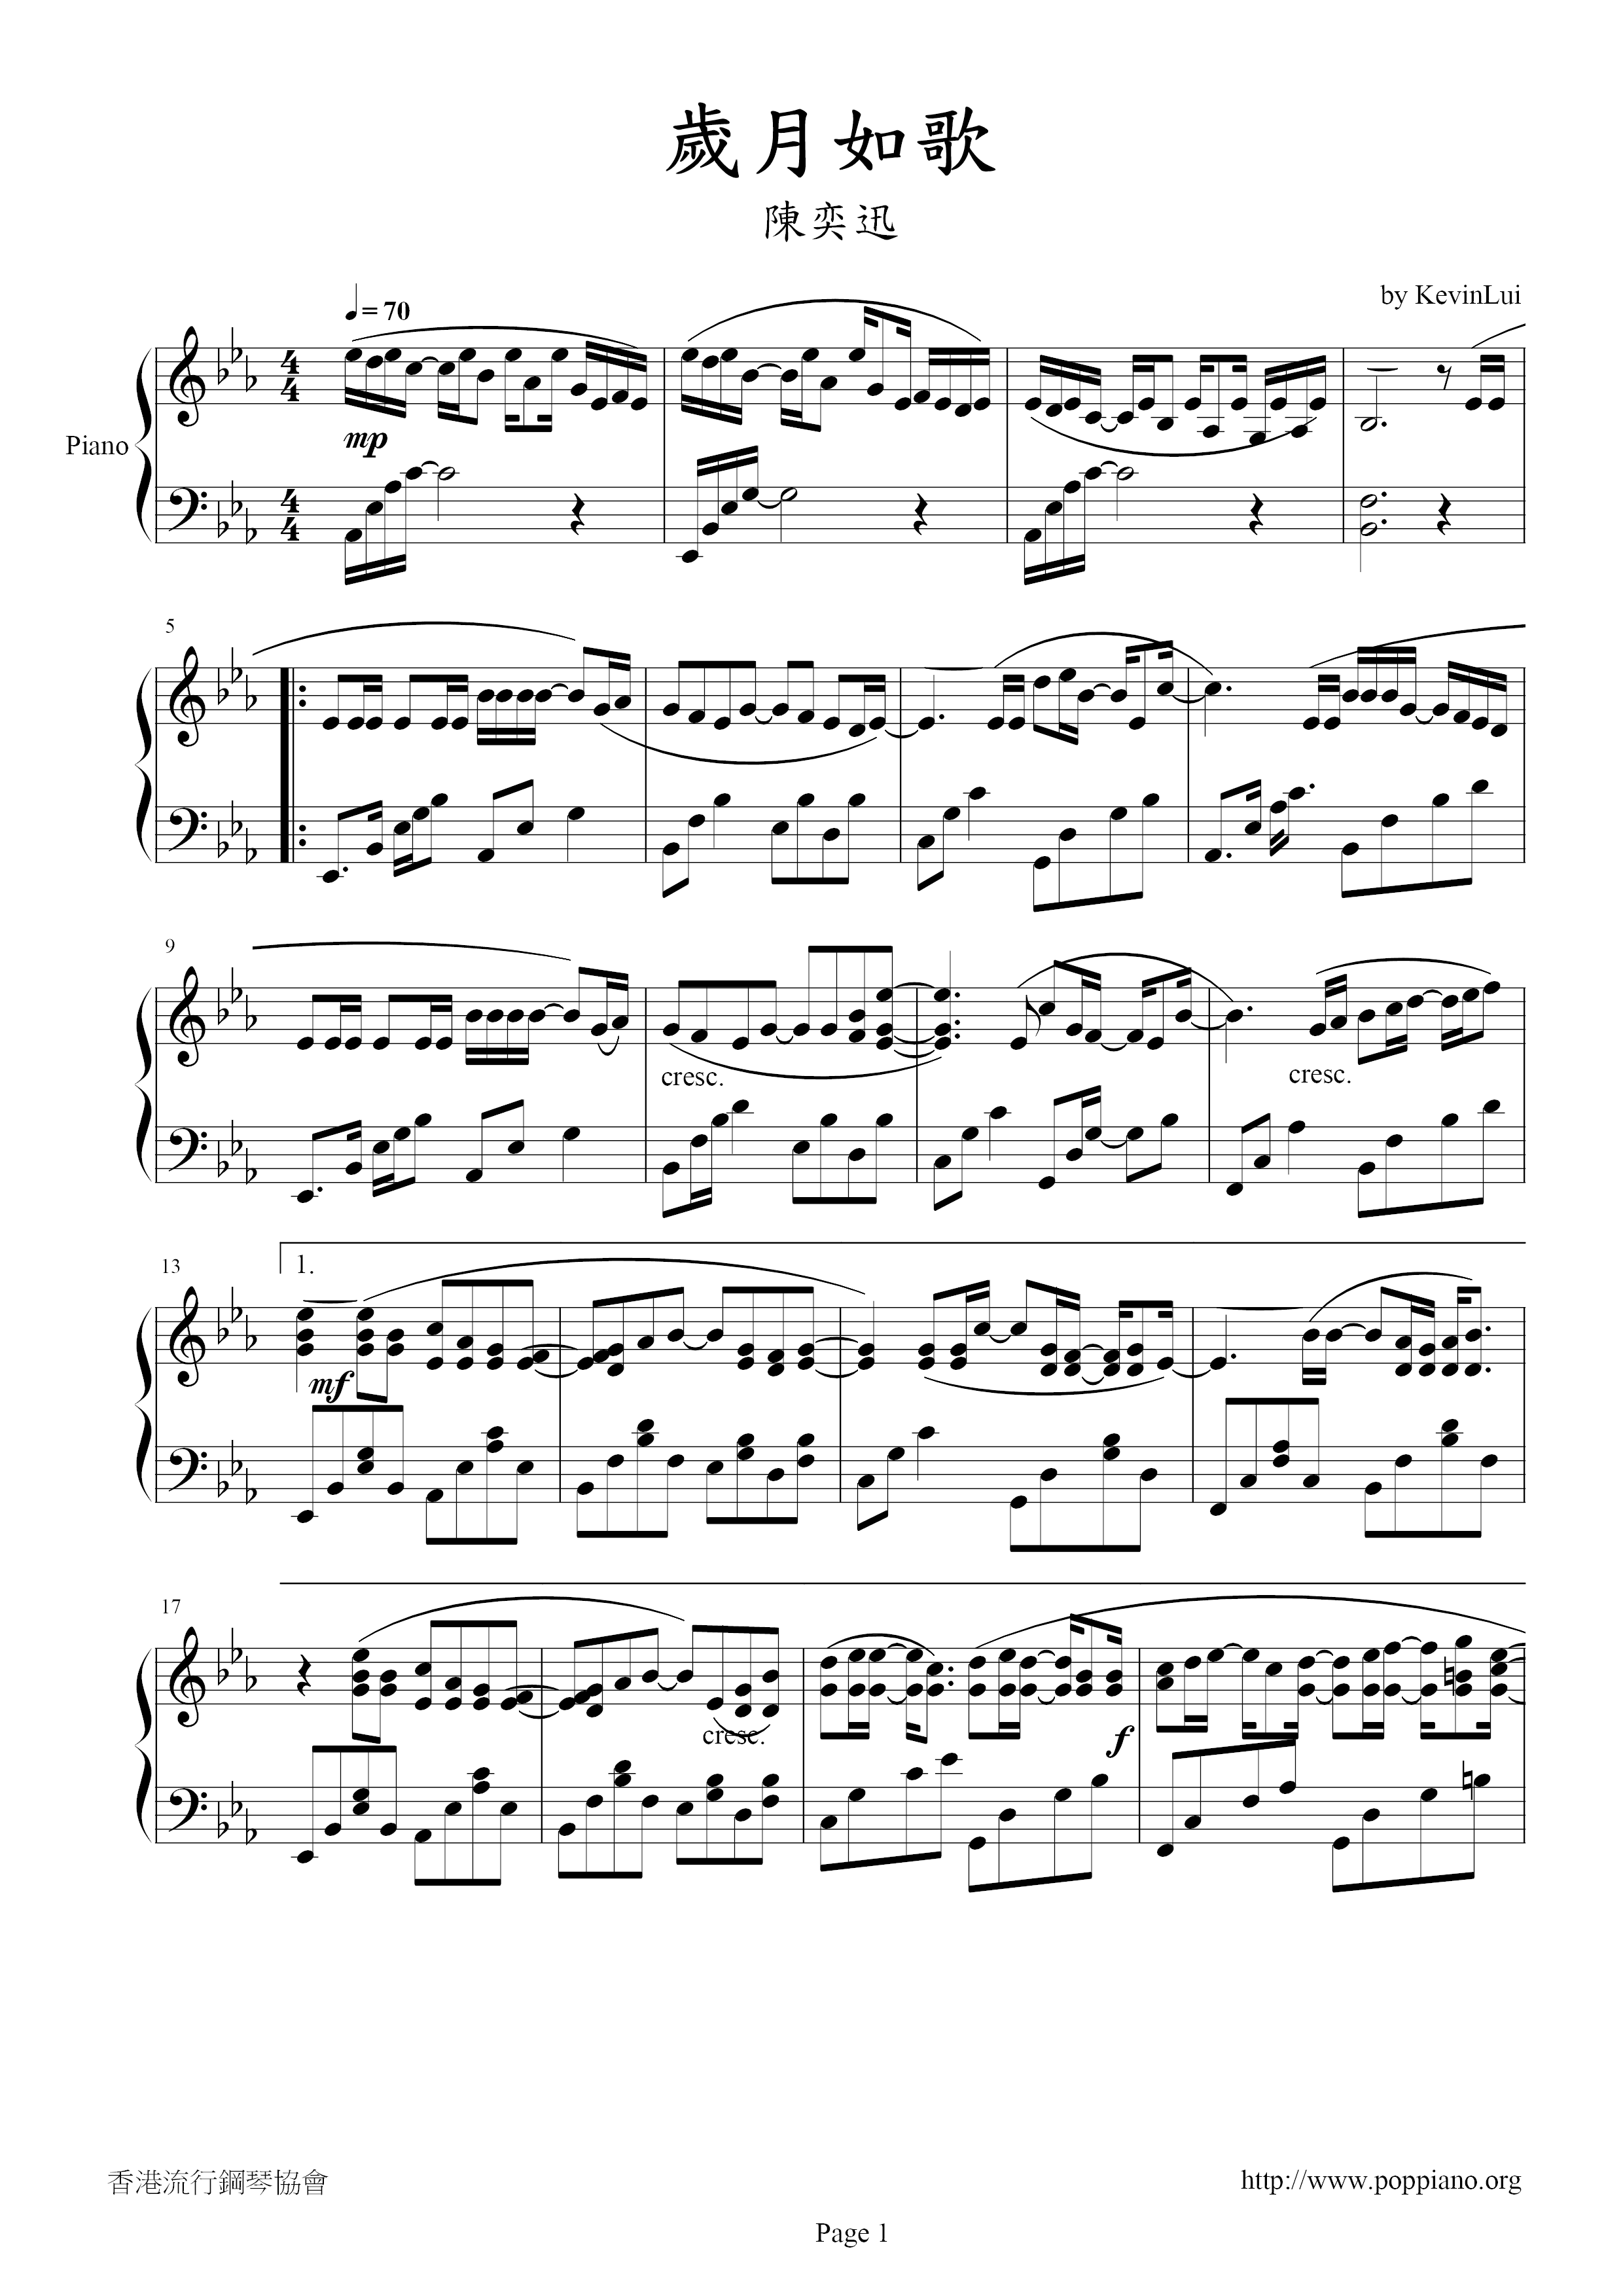 Song Of The Years Gone By Score